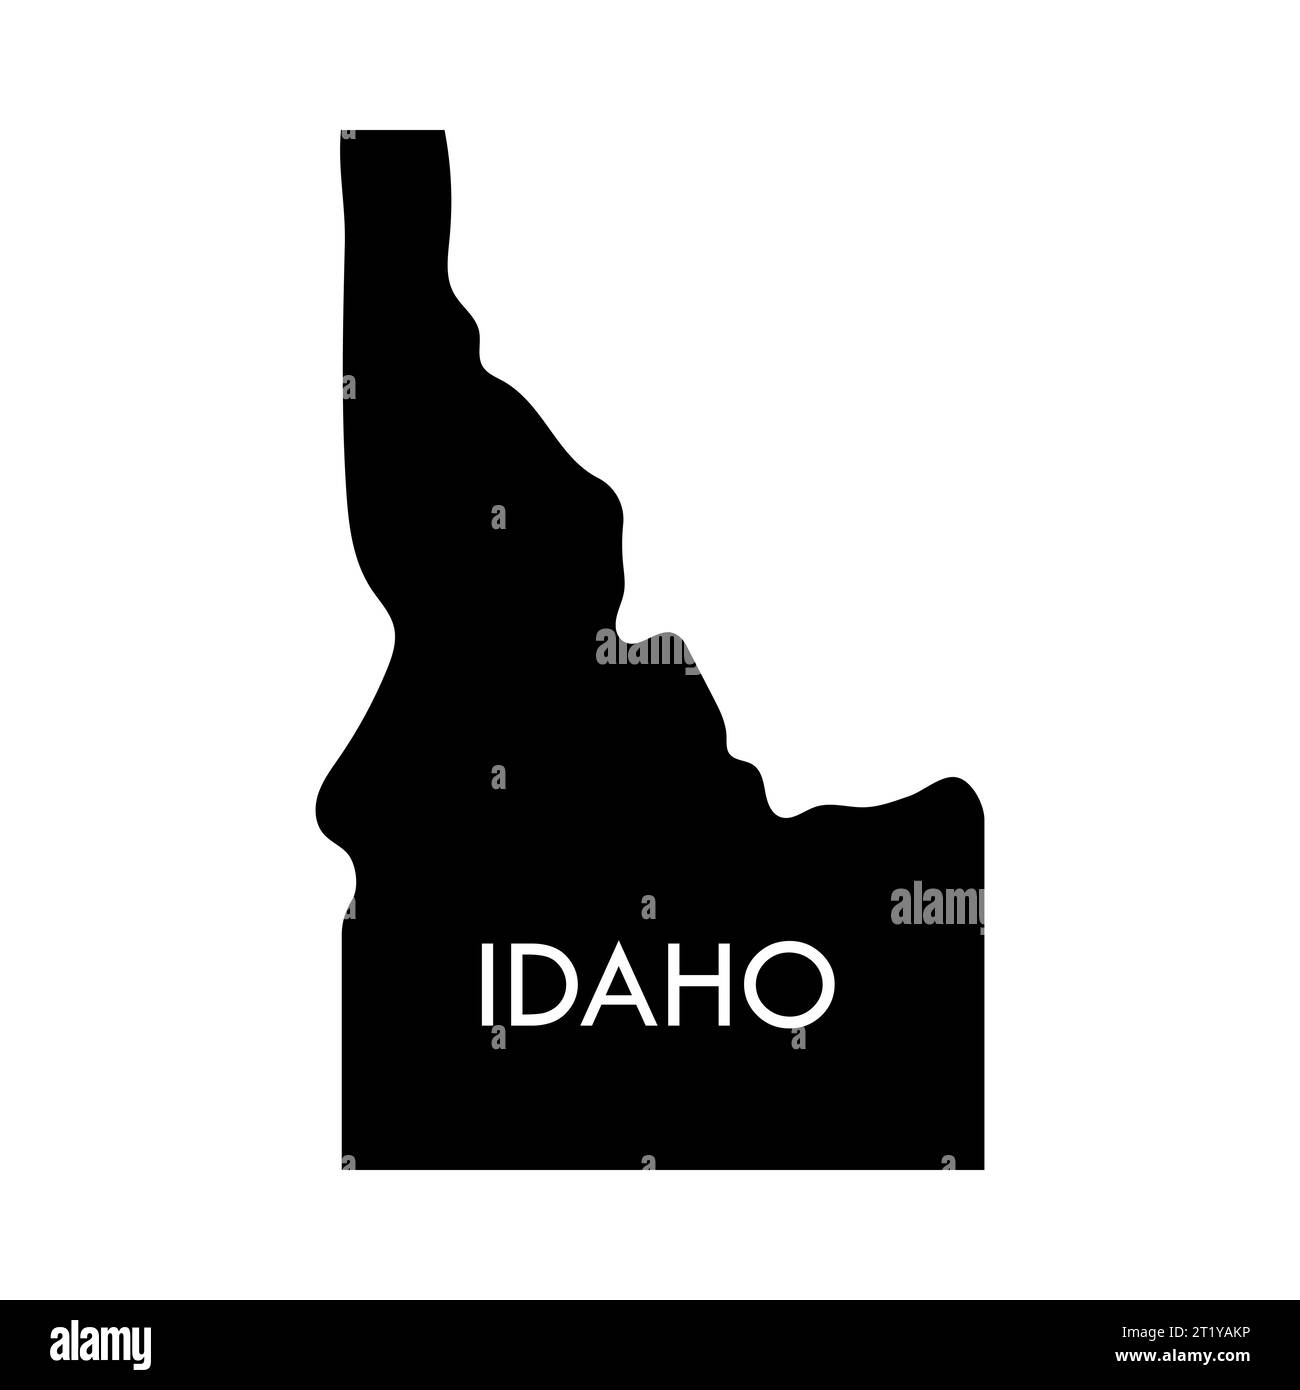 Idaho a US state black element isolated on white background. United state of America. Map with county borders. Stock Vector